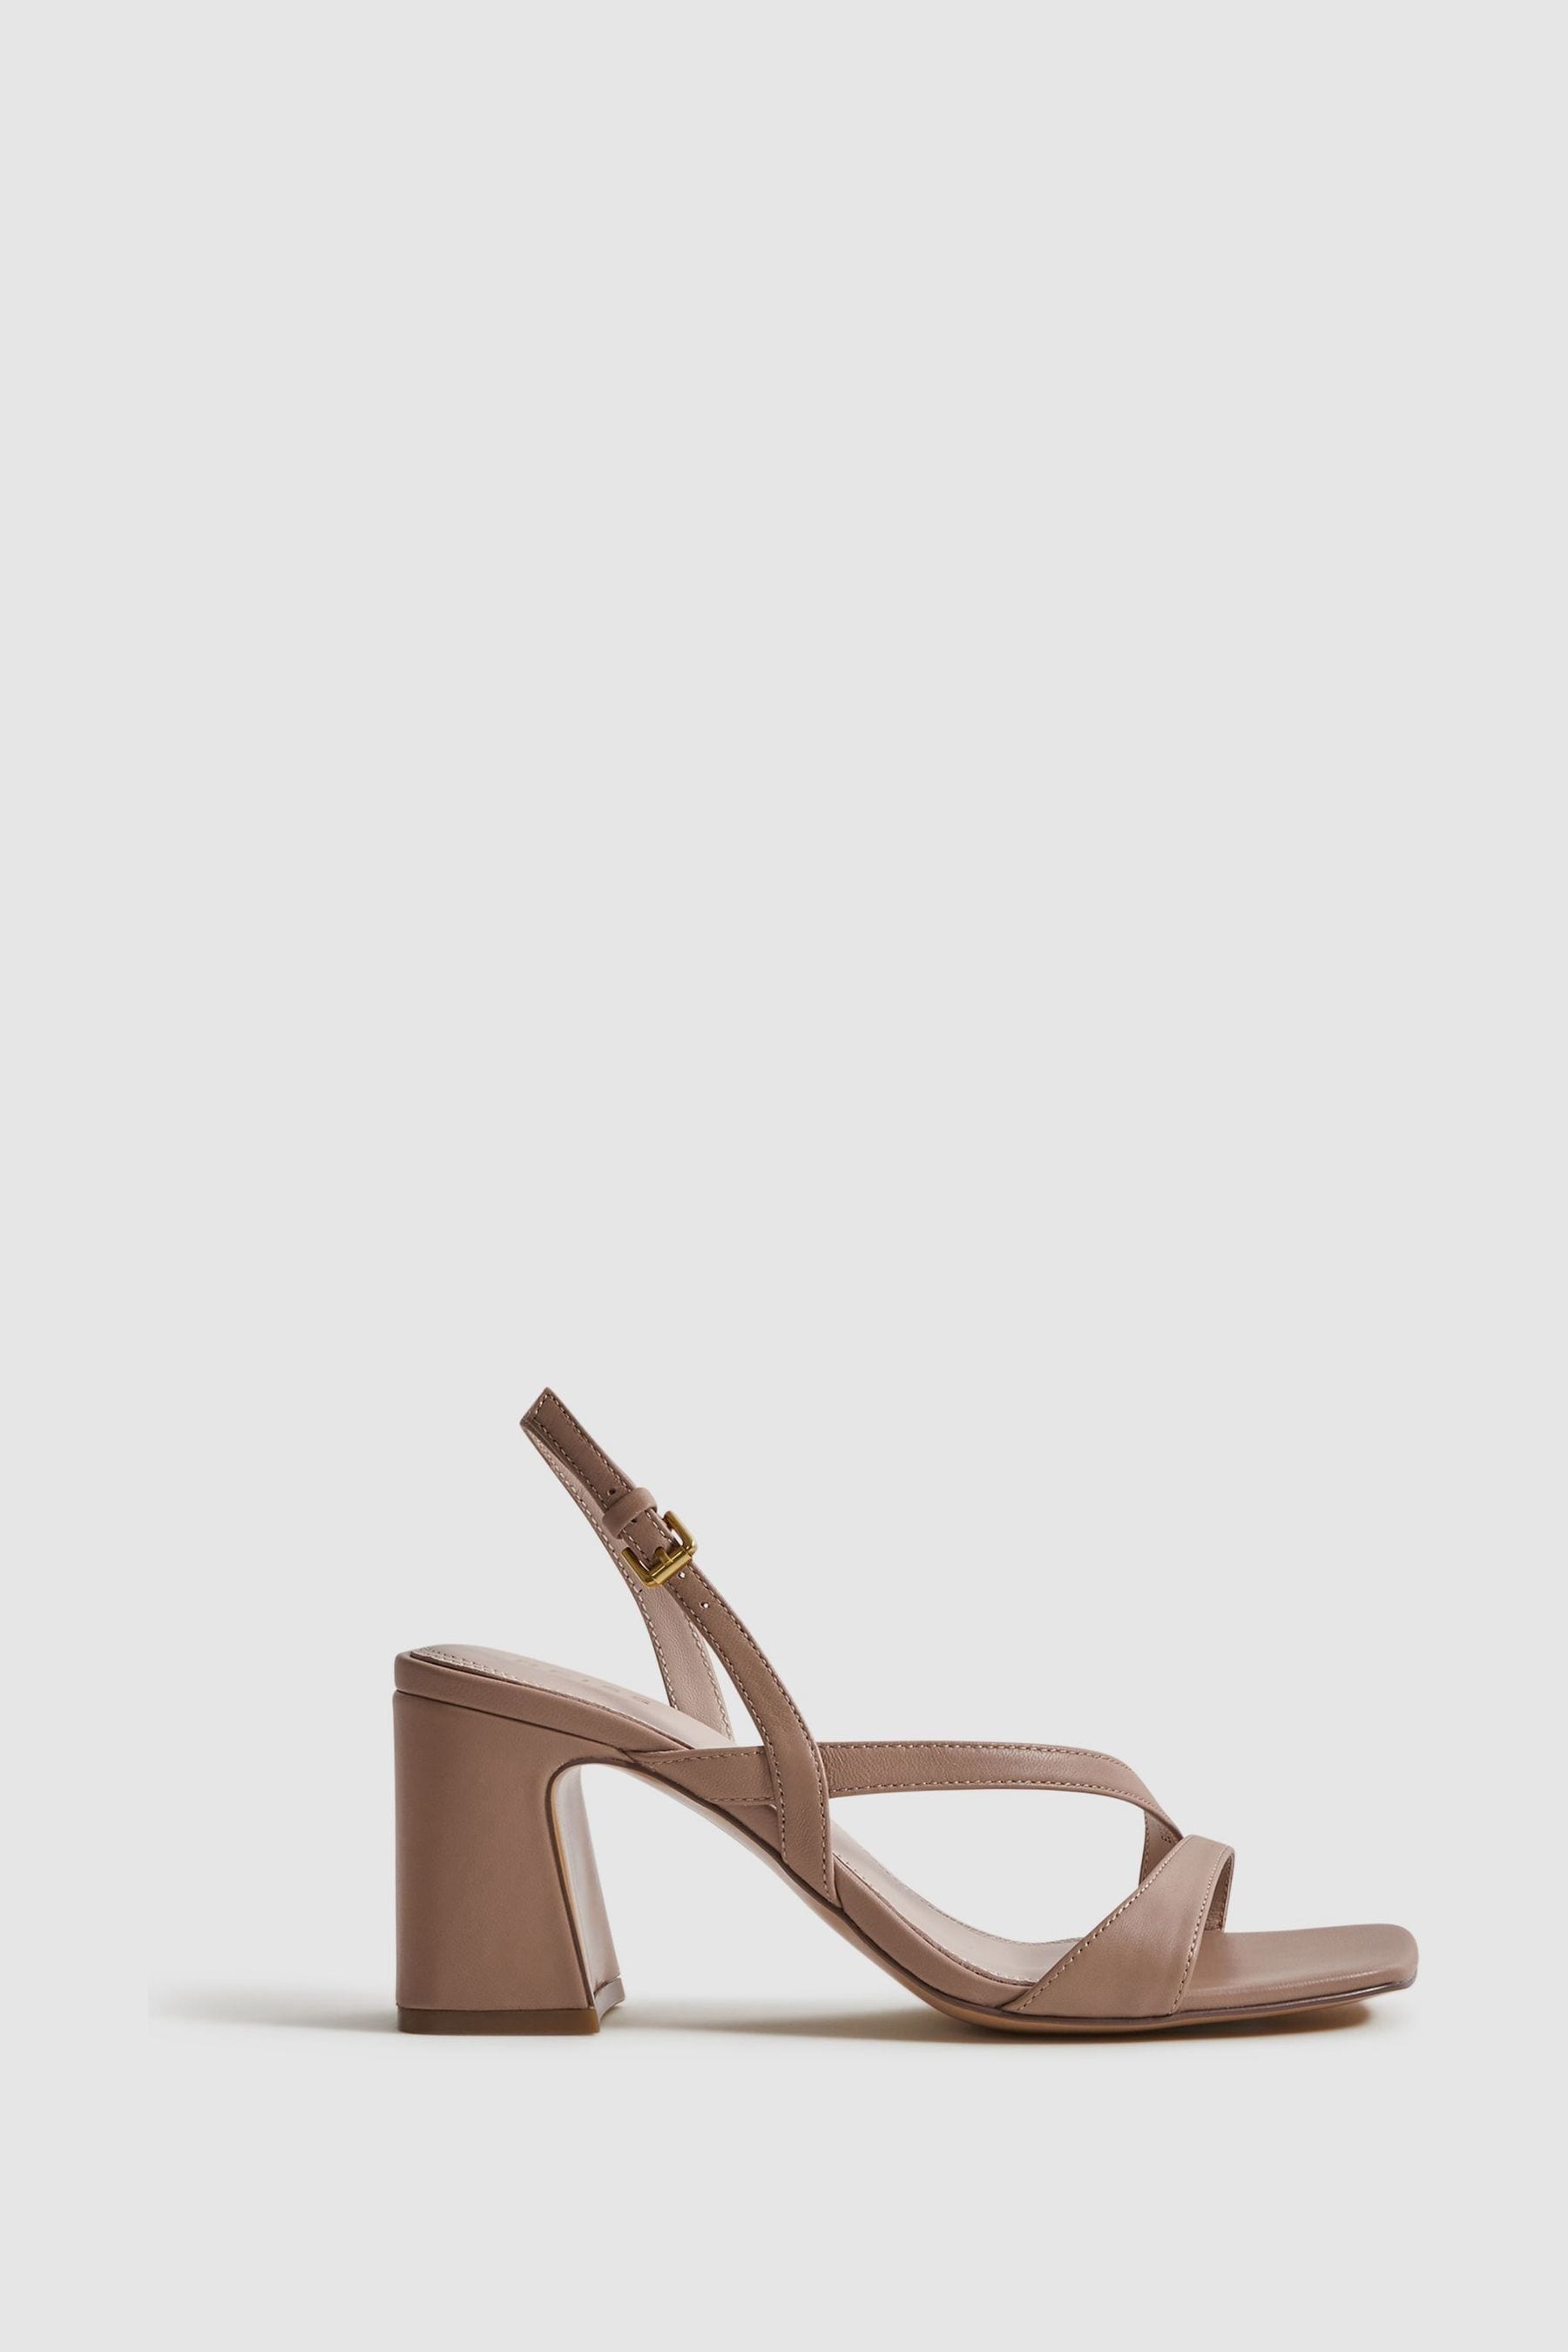 Reiss Alice - Nude Strappy Leather Heeled Sandals, Uk 6 Eu 39